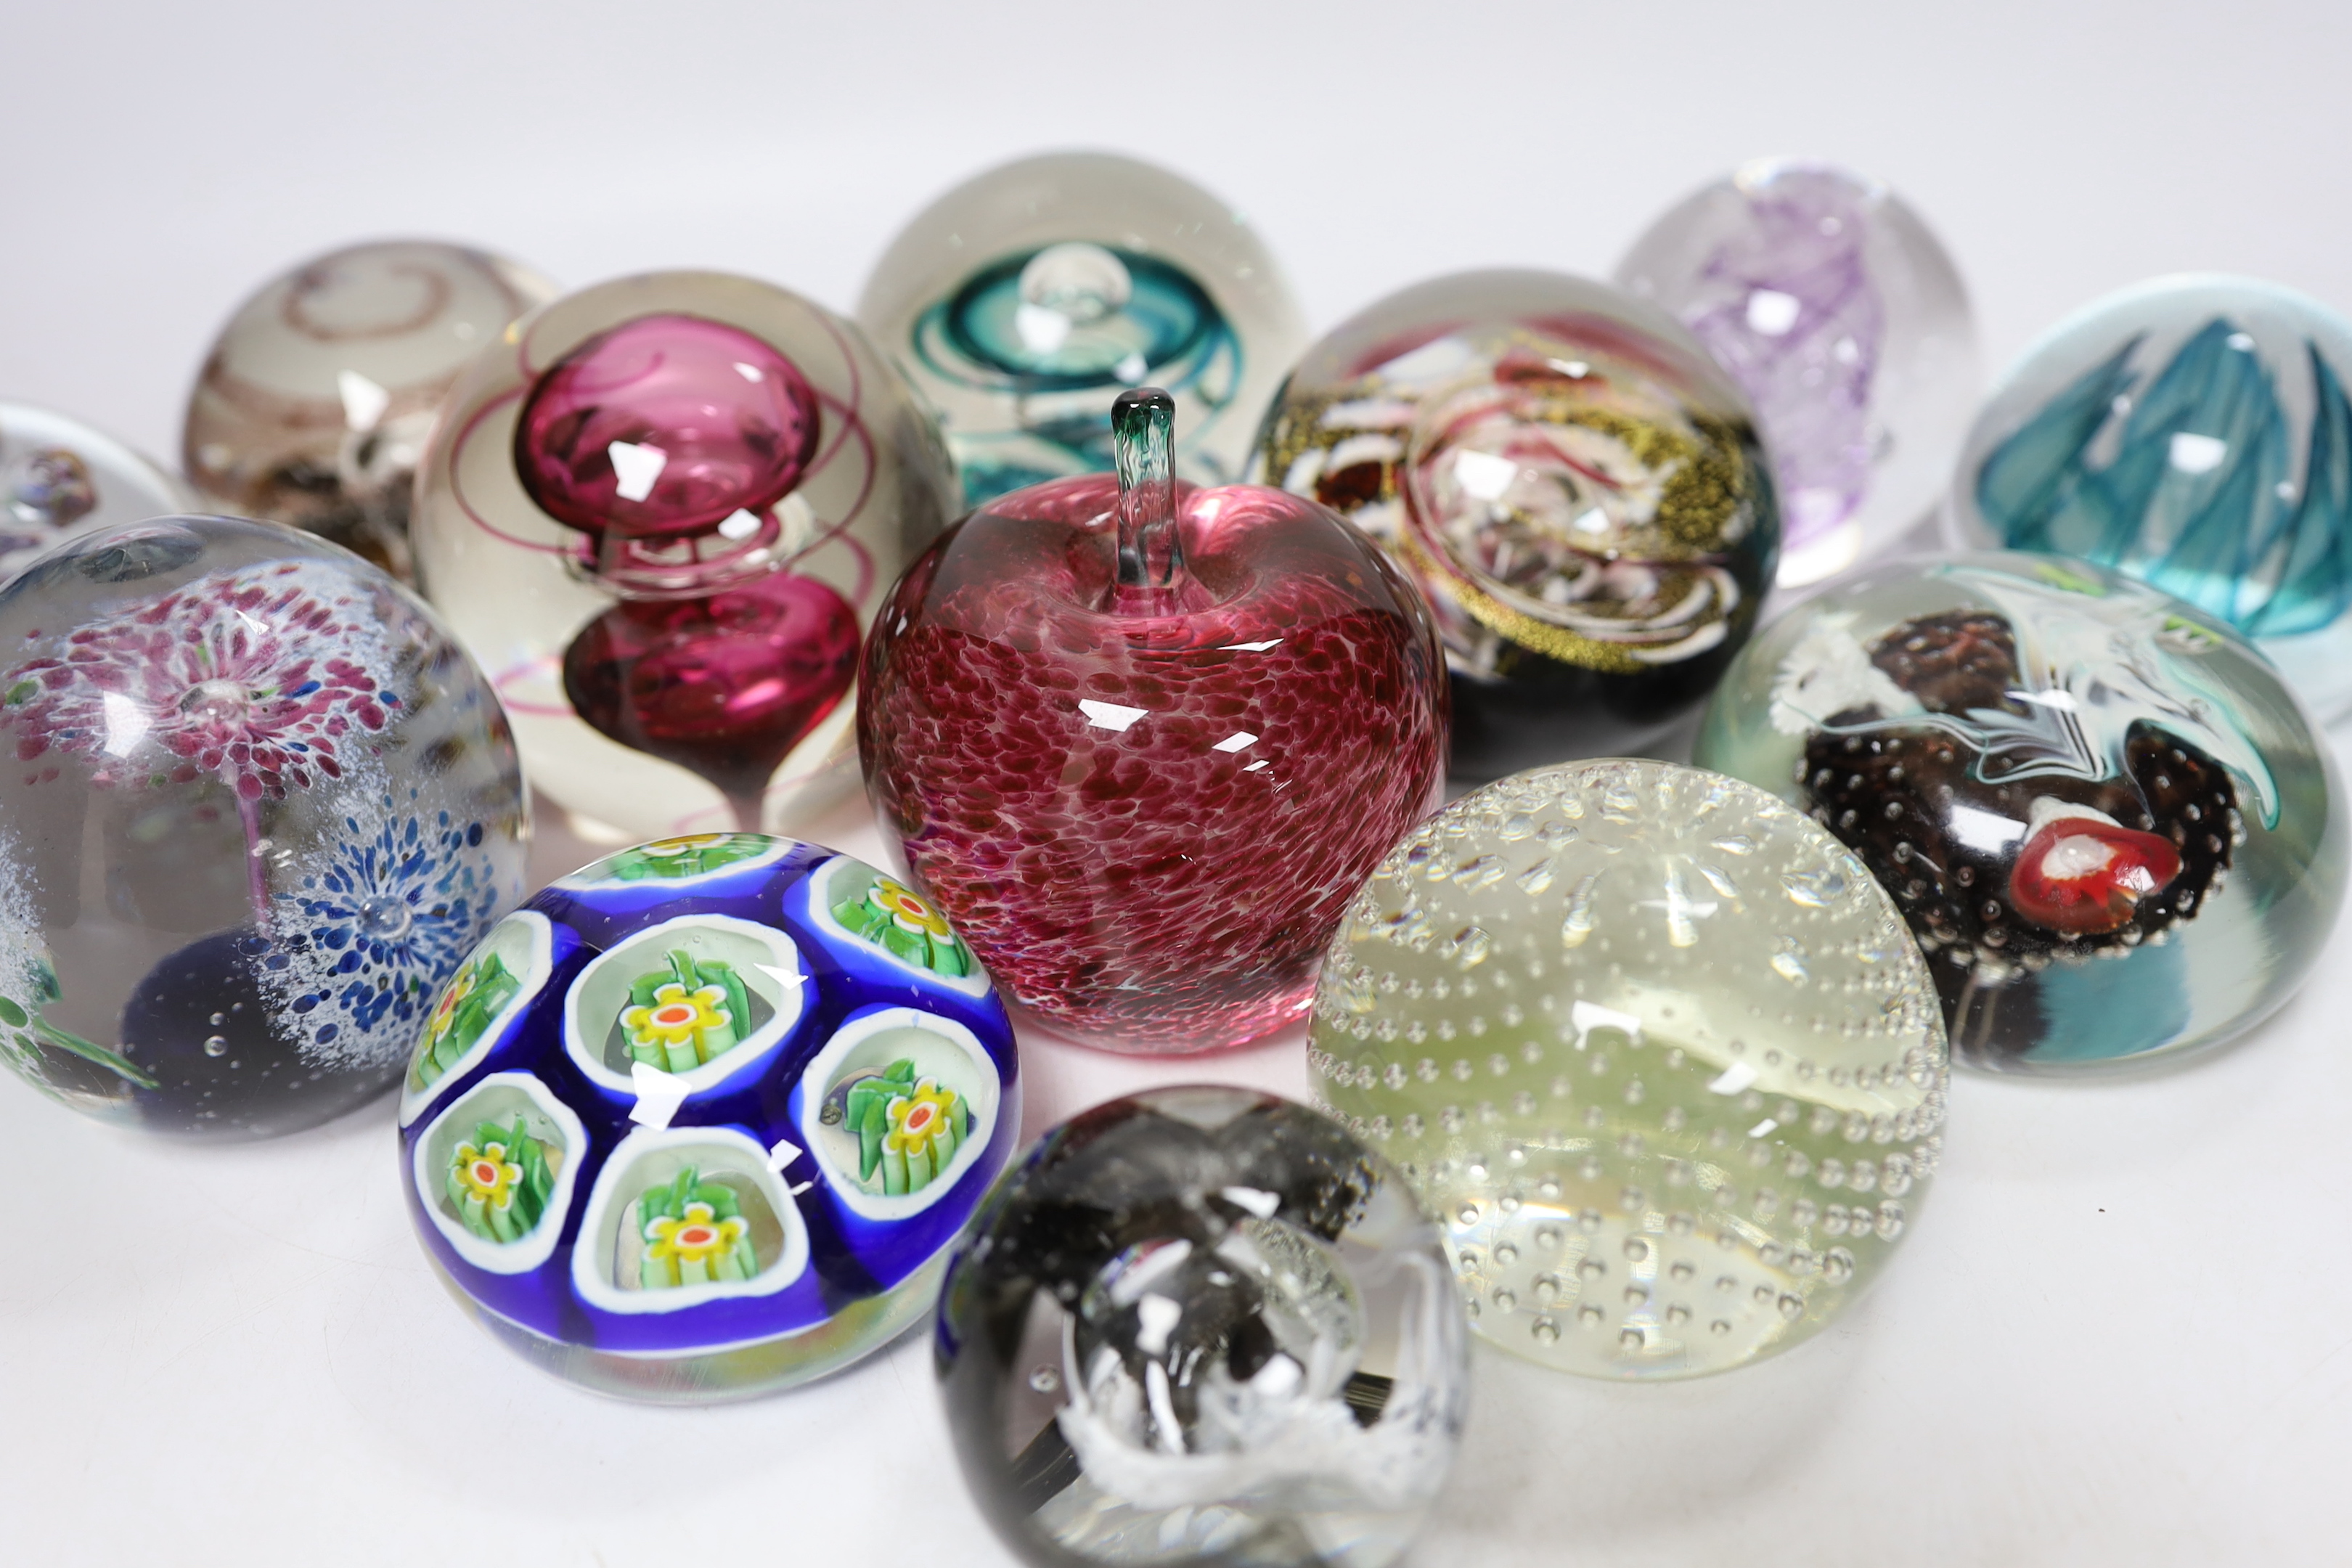 Thirteen glass paperweights including Caithness and Murano, largest 9cm in diameter